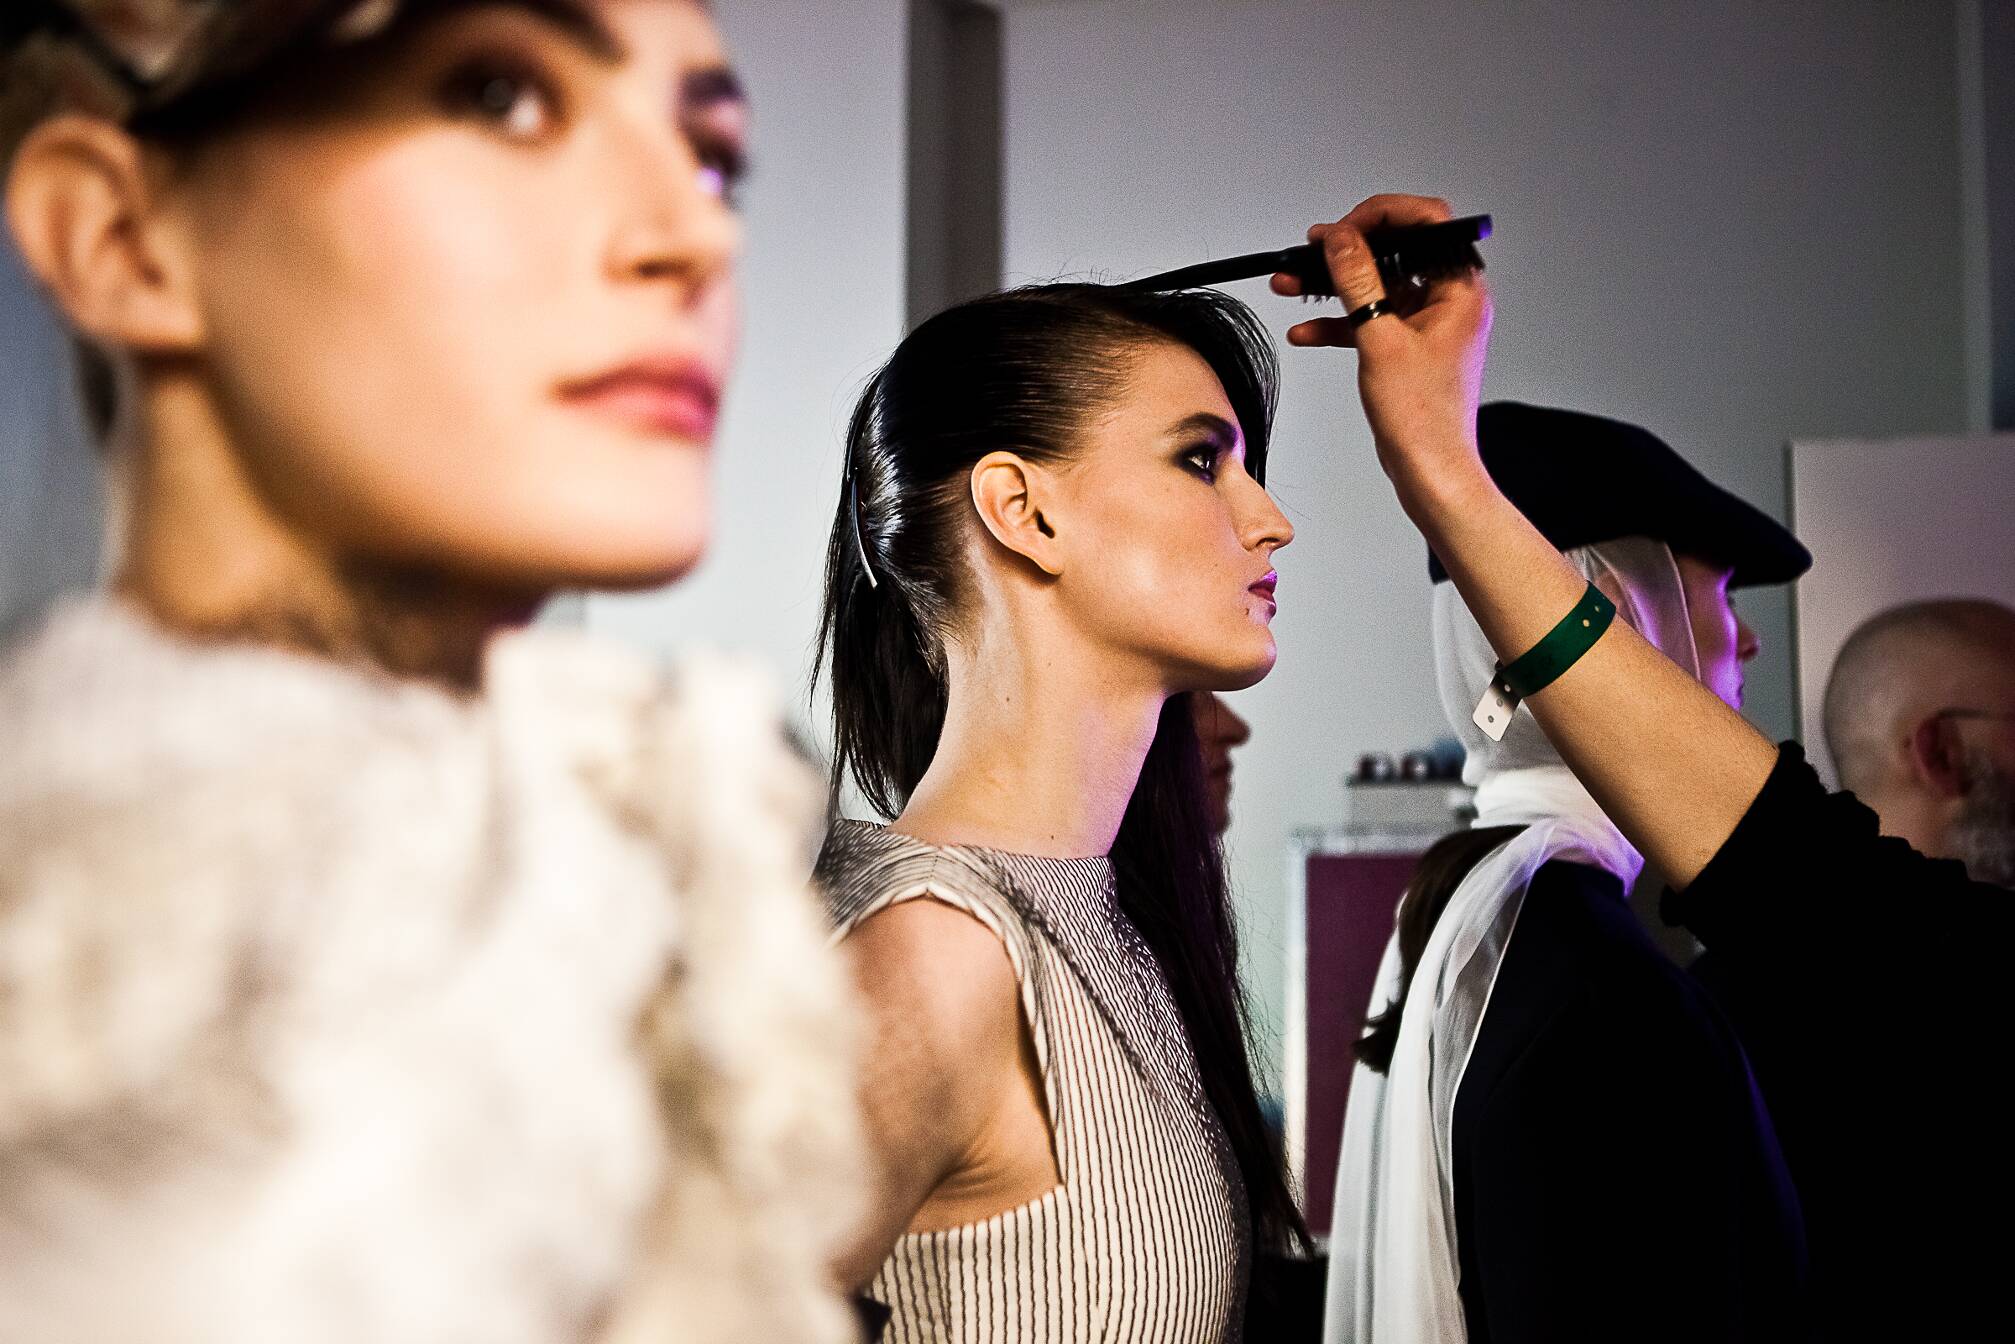 Backstage Jean Paul Gaultier Haute Couture Hair Style Trends 2015